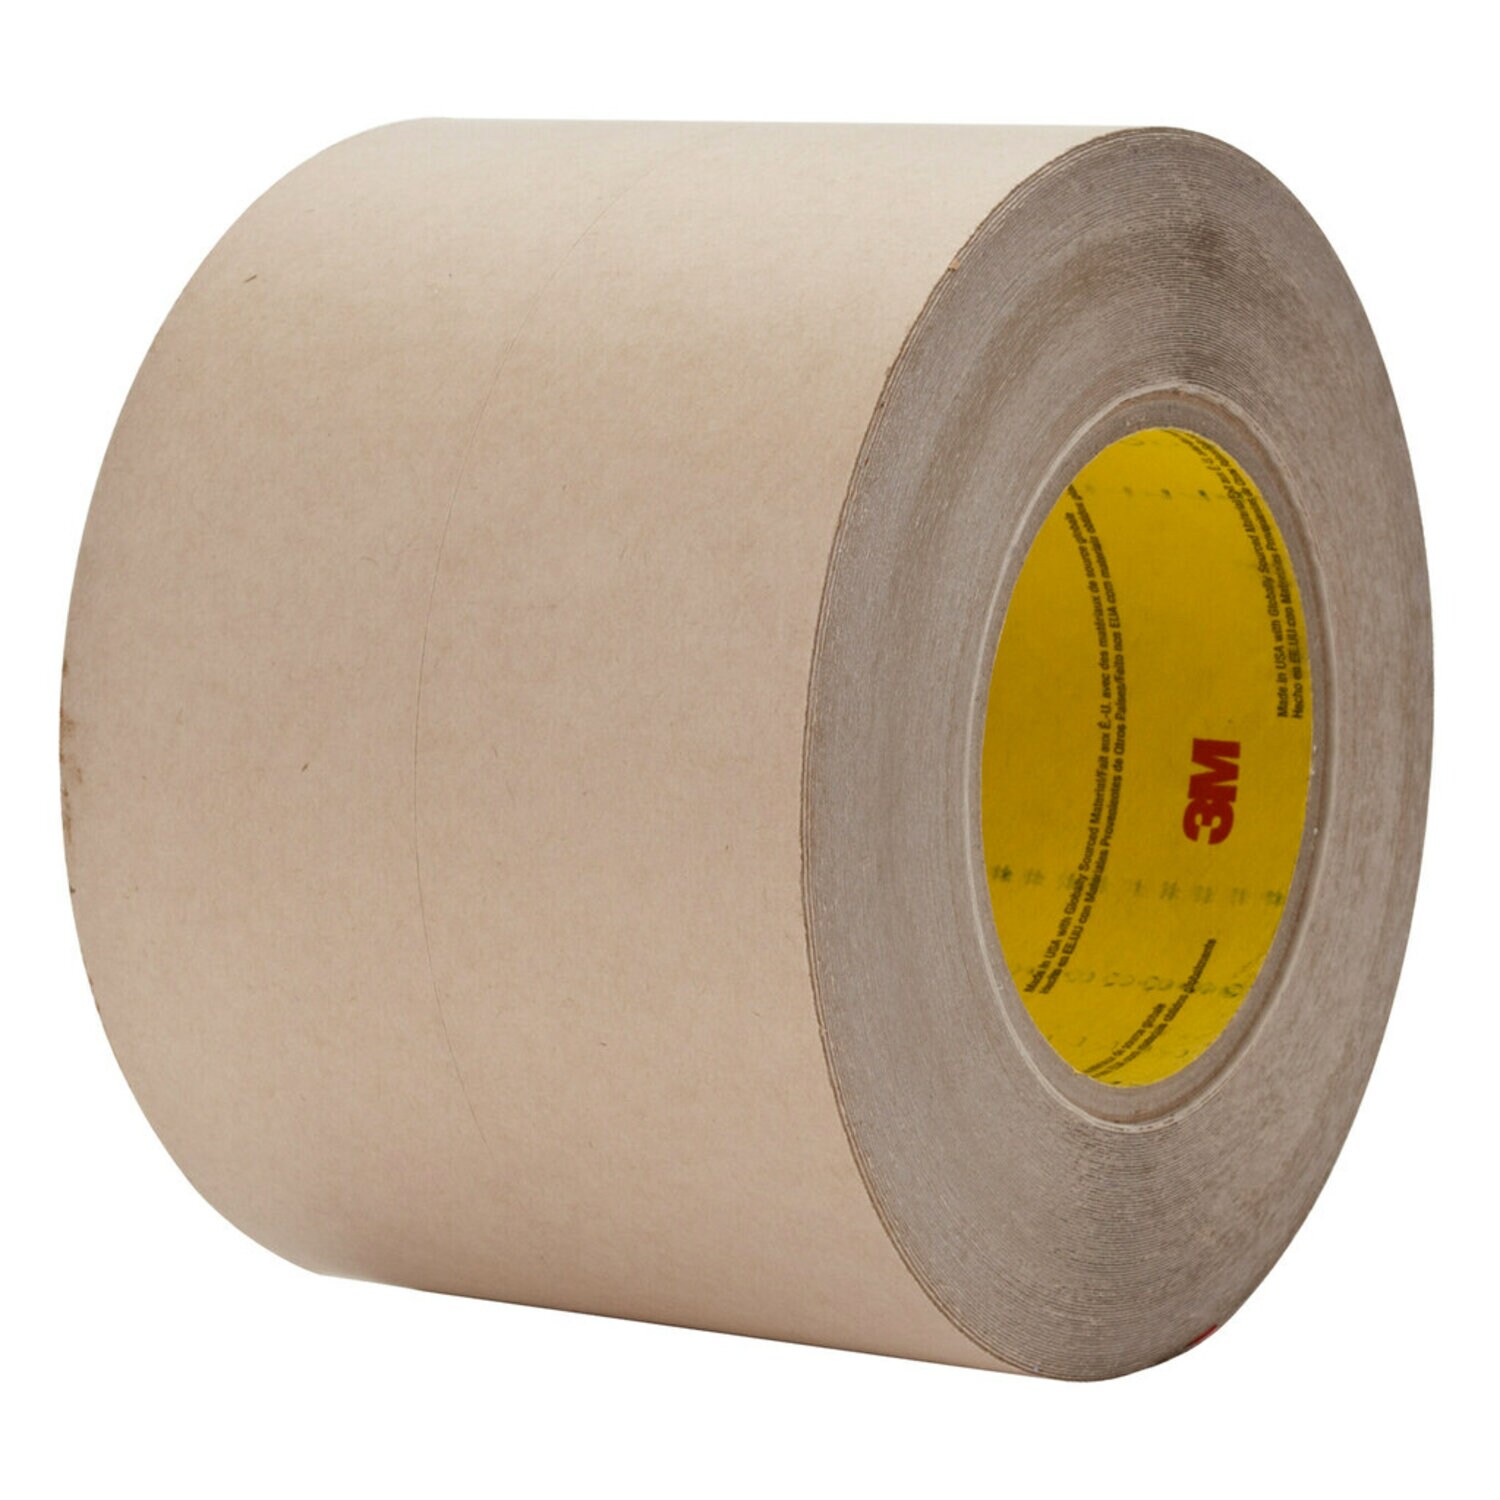 7000049609 - 3M Sealing Tape 8777, Tan, 2 in x 75 ft, 24 rolls per case, Solid Liner